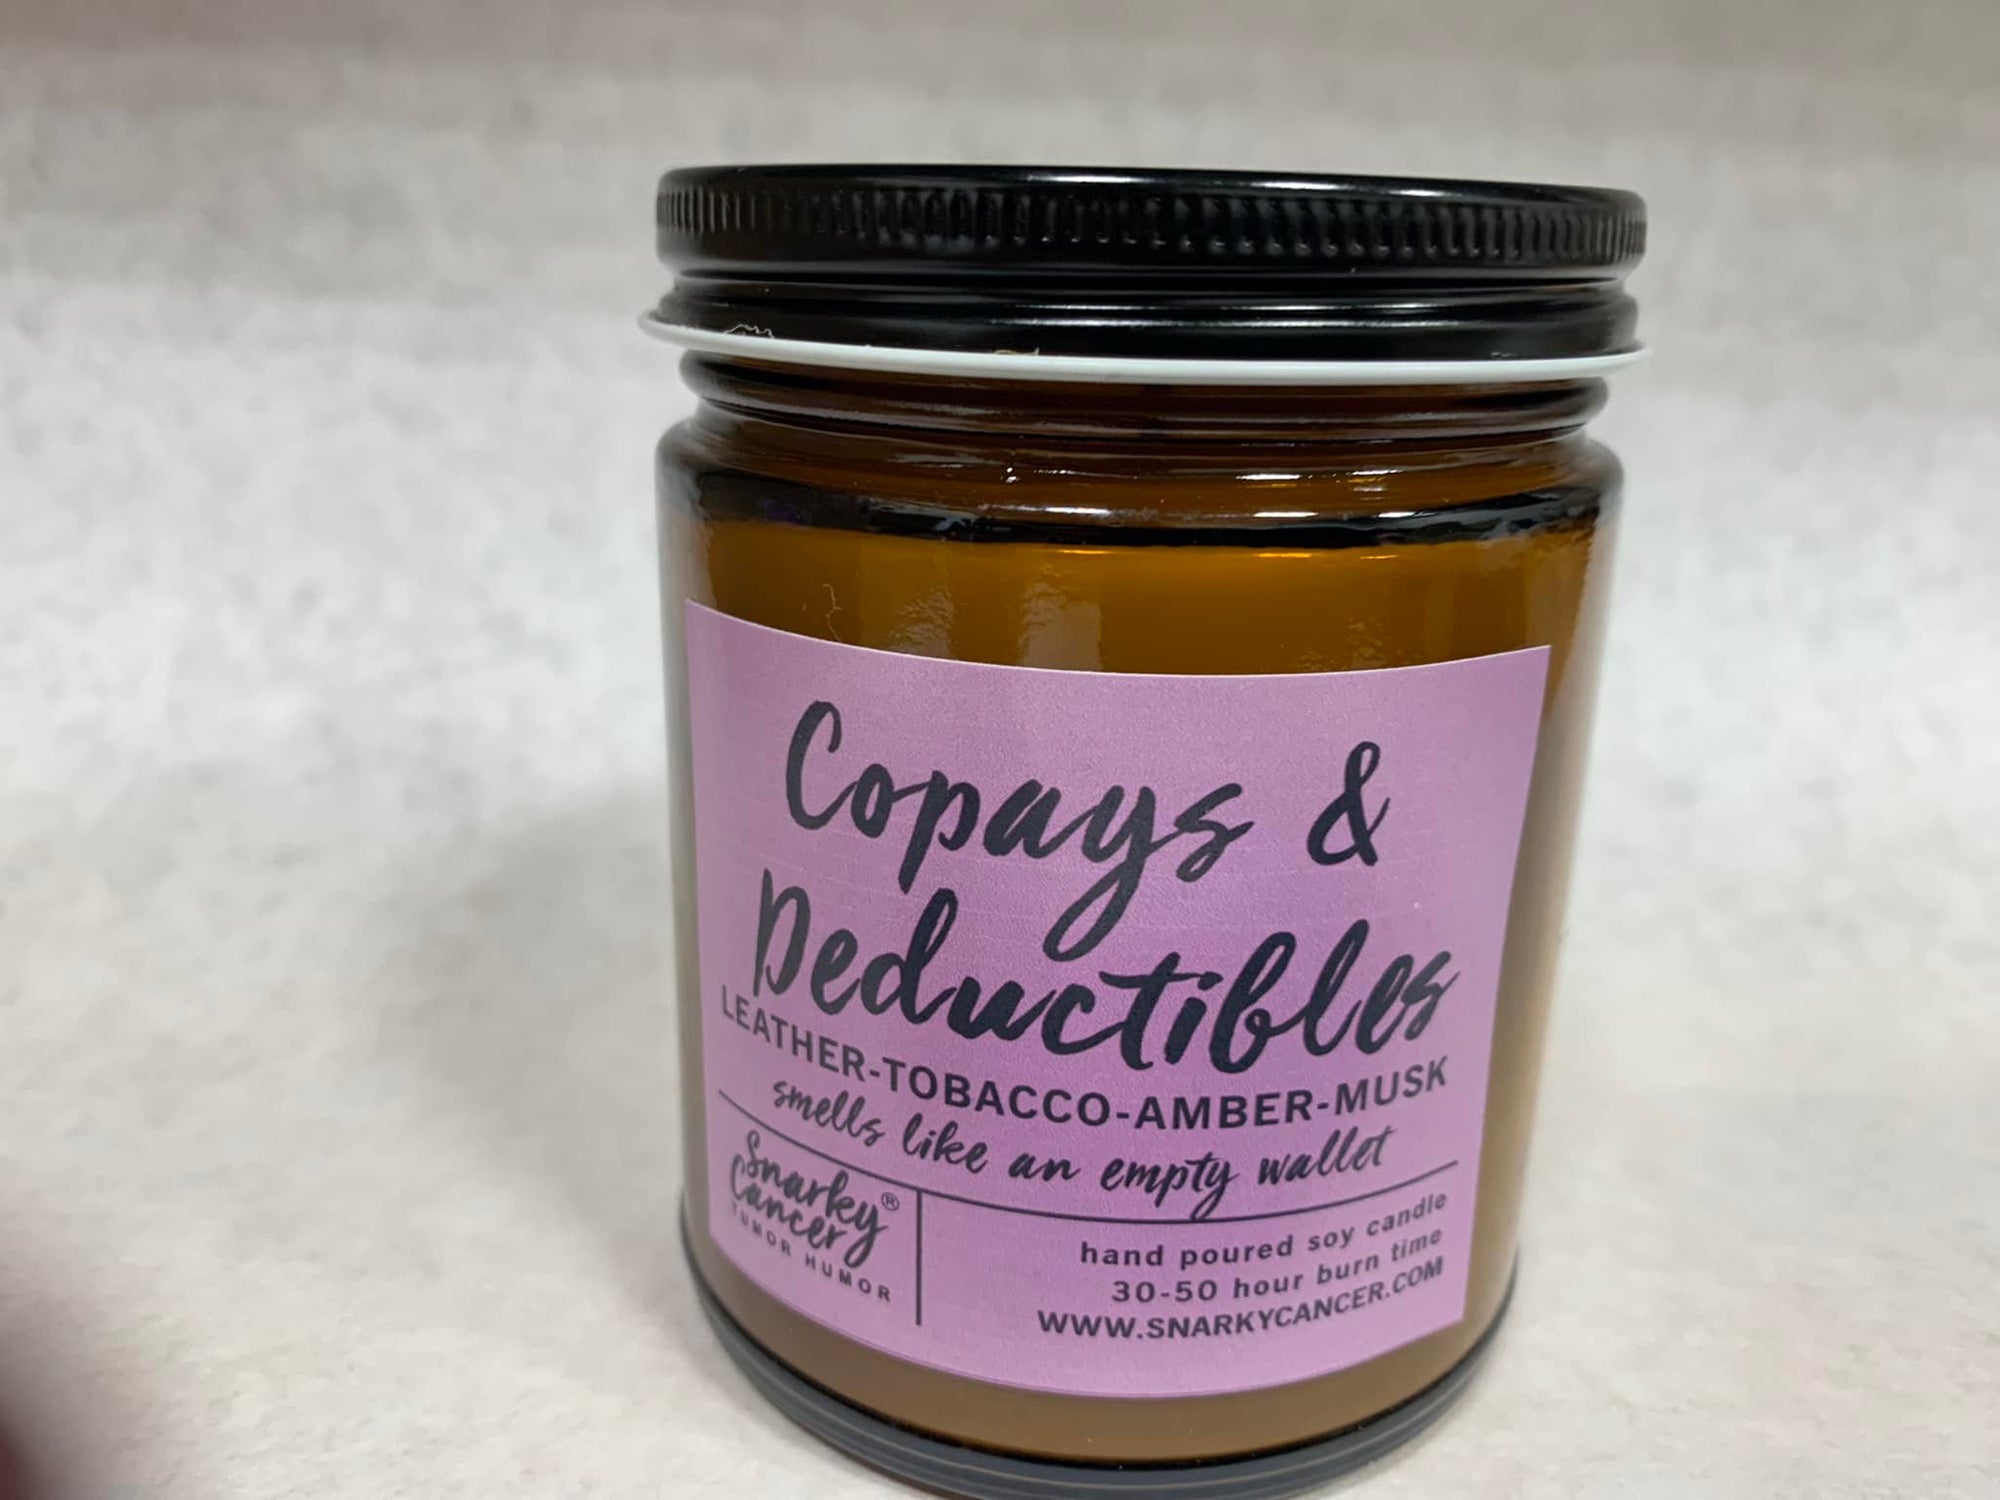 Co-Pays & Deductibles Soy Candle